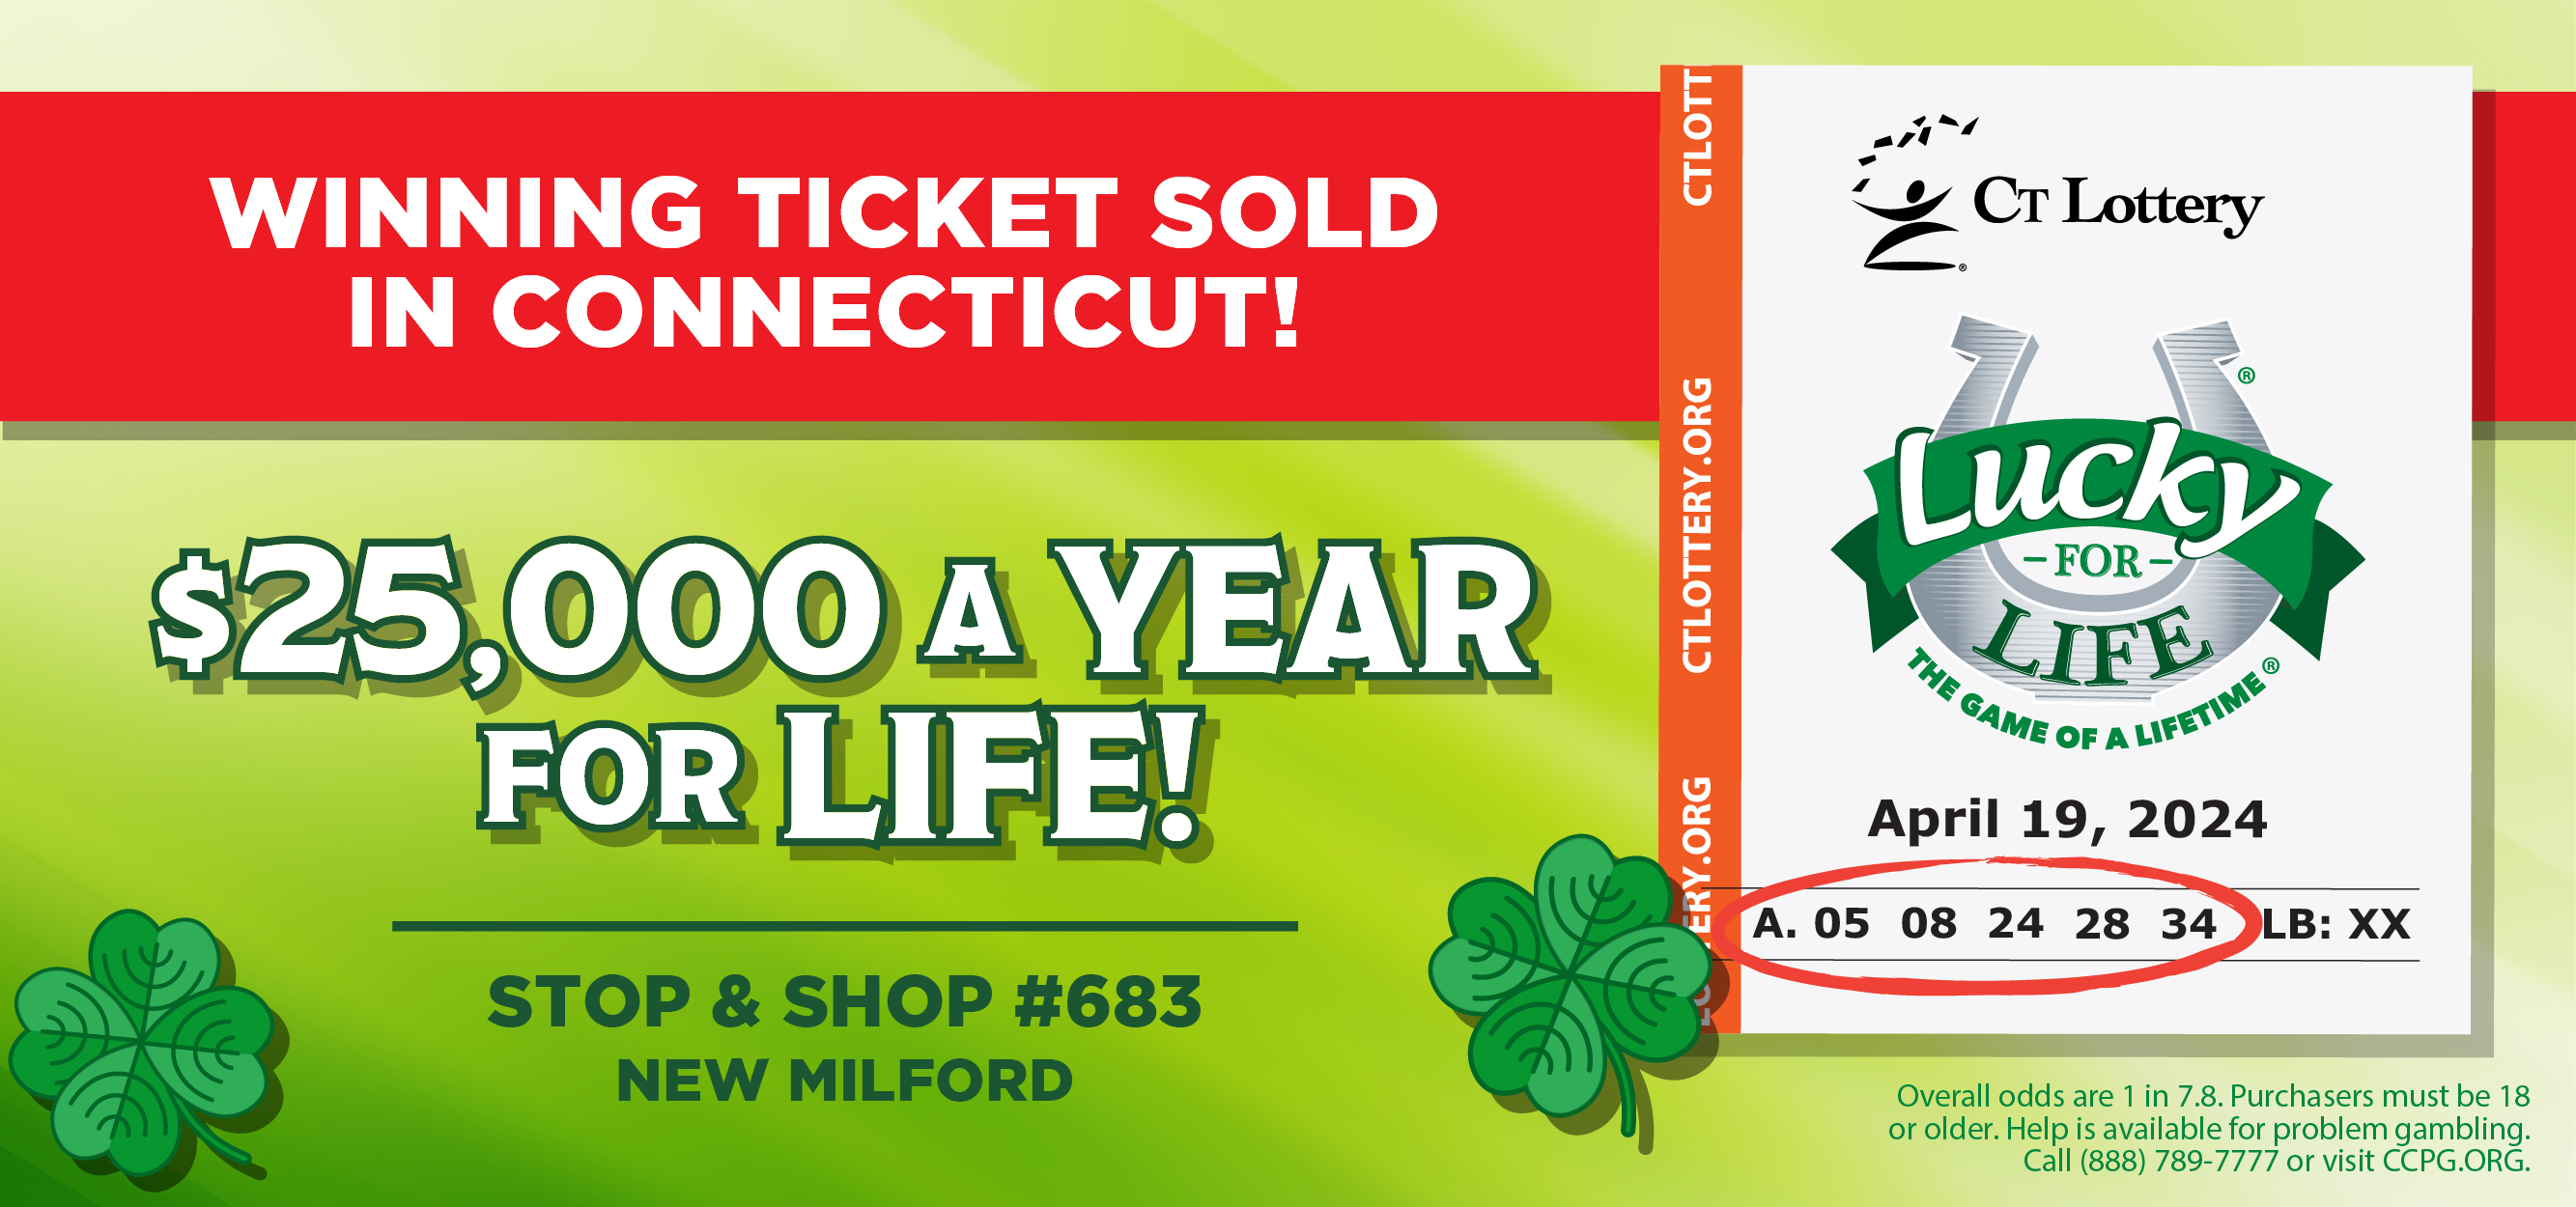 Lucky for Life Winning Ticket Sold!